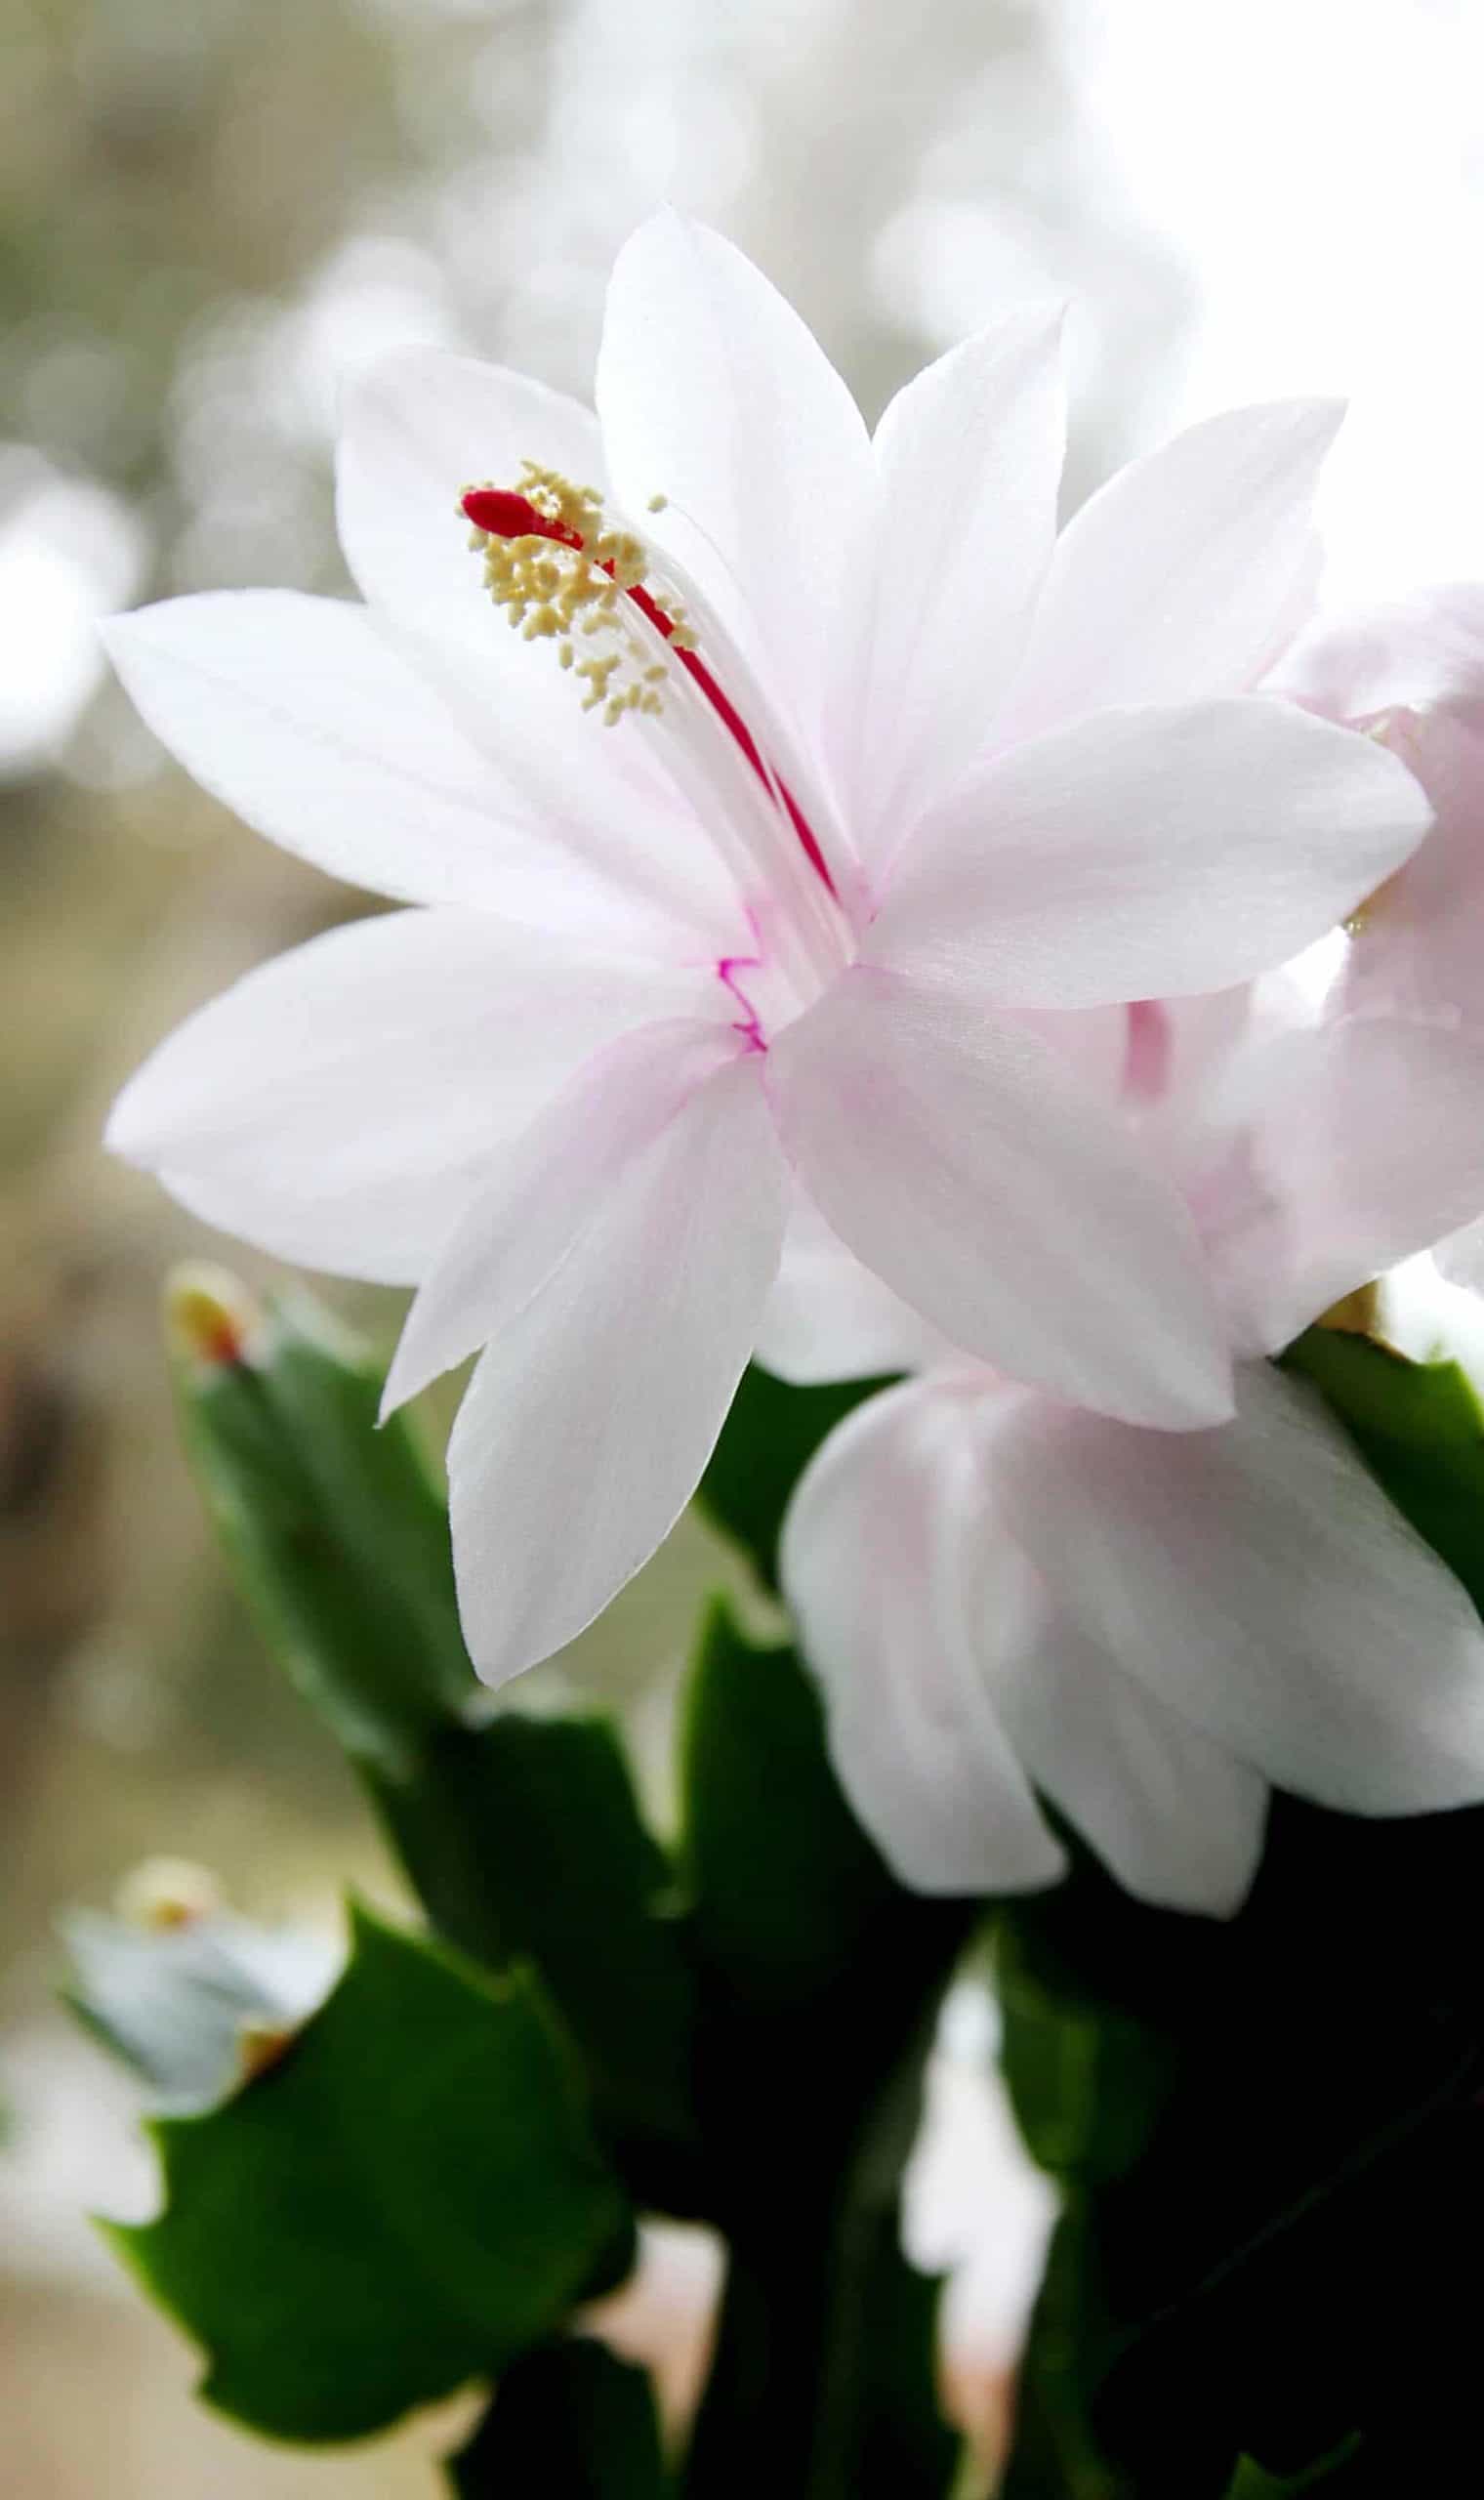 Christmas cactus flower and buds. Photo by Brendan Adam-Zwelling